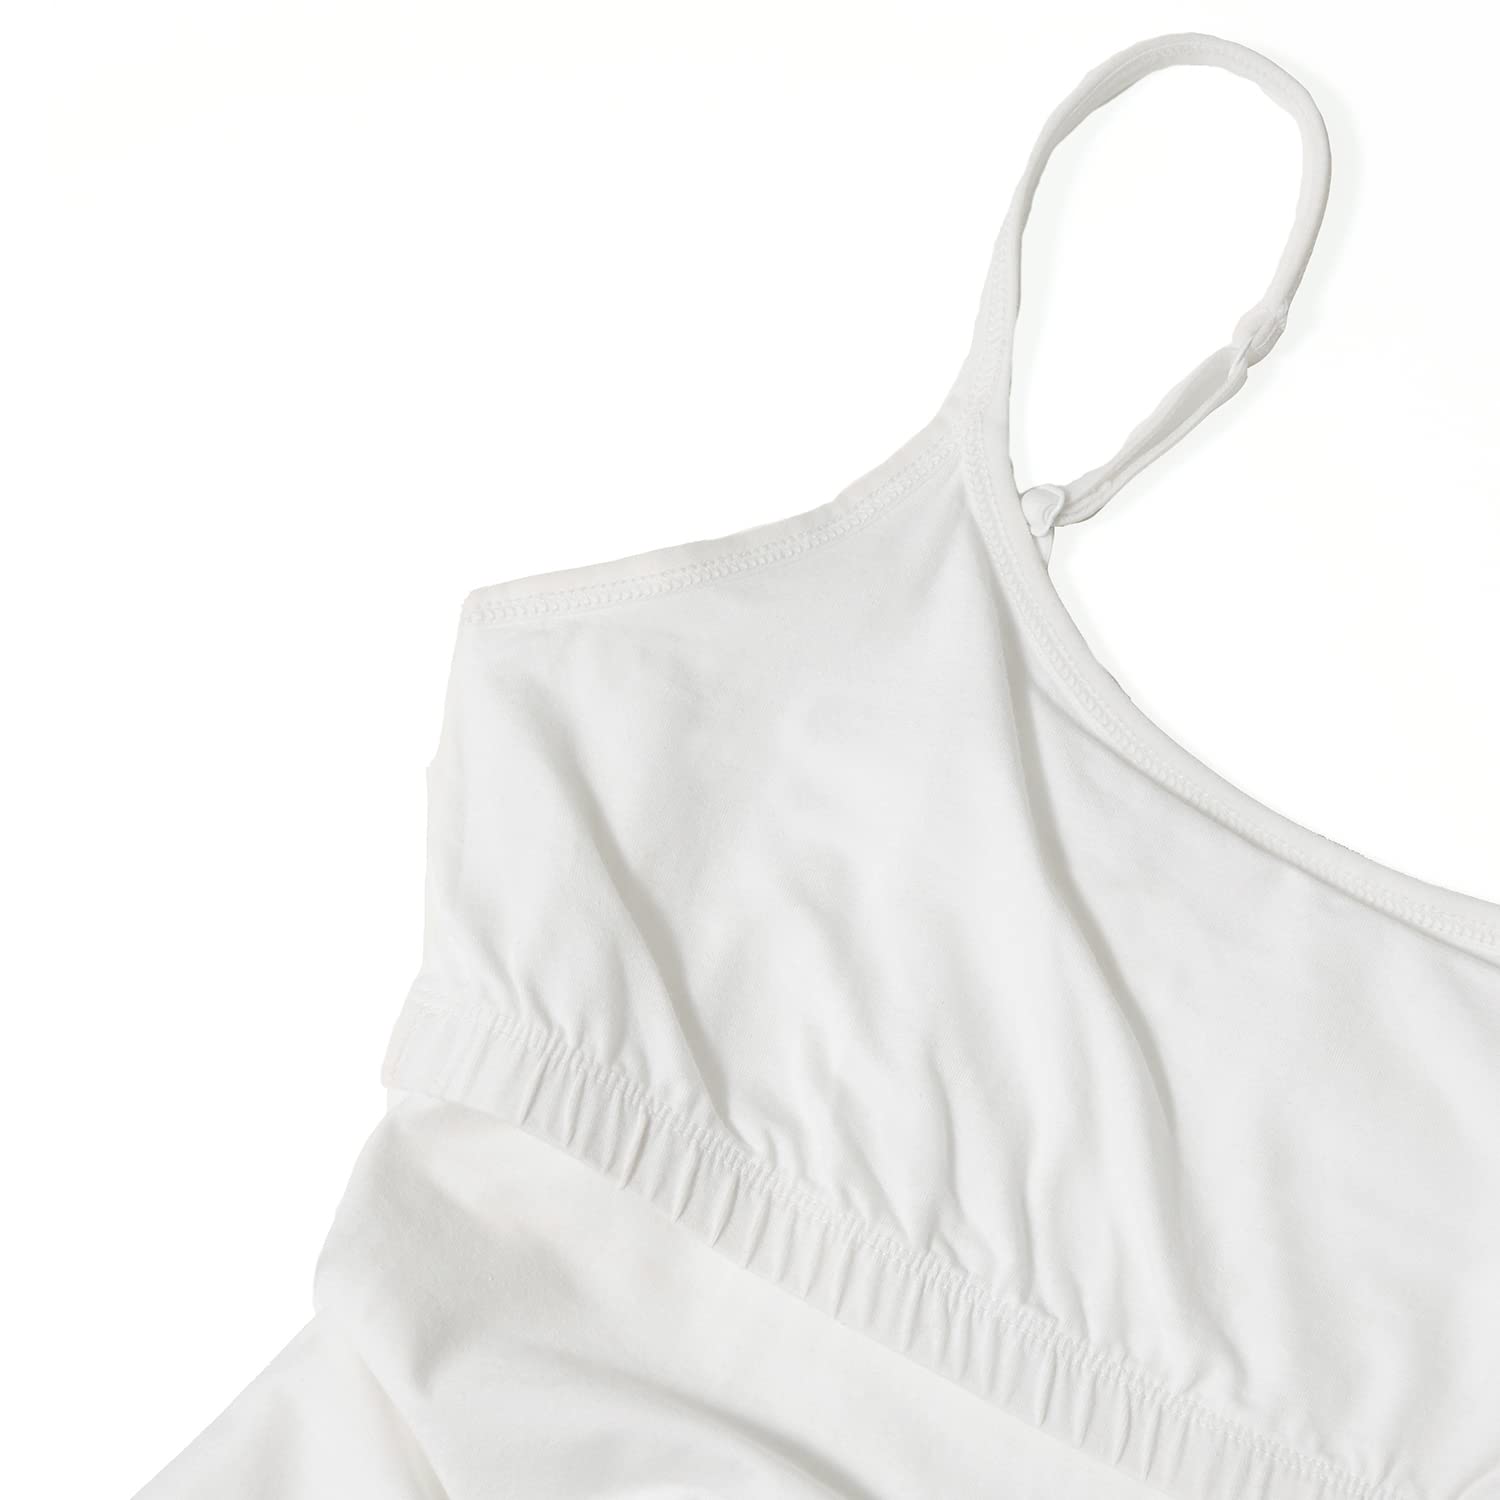 Pact Women's Organic Cotton Camisole Tank Top with Built-in Shelf Bra